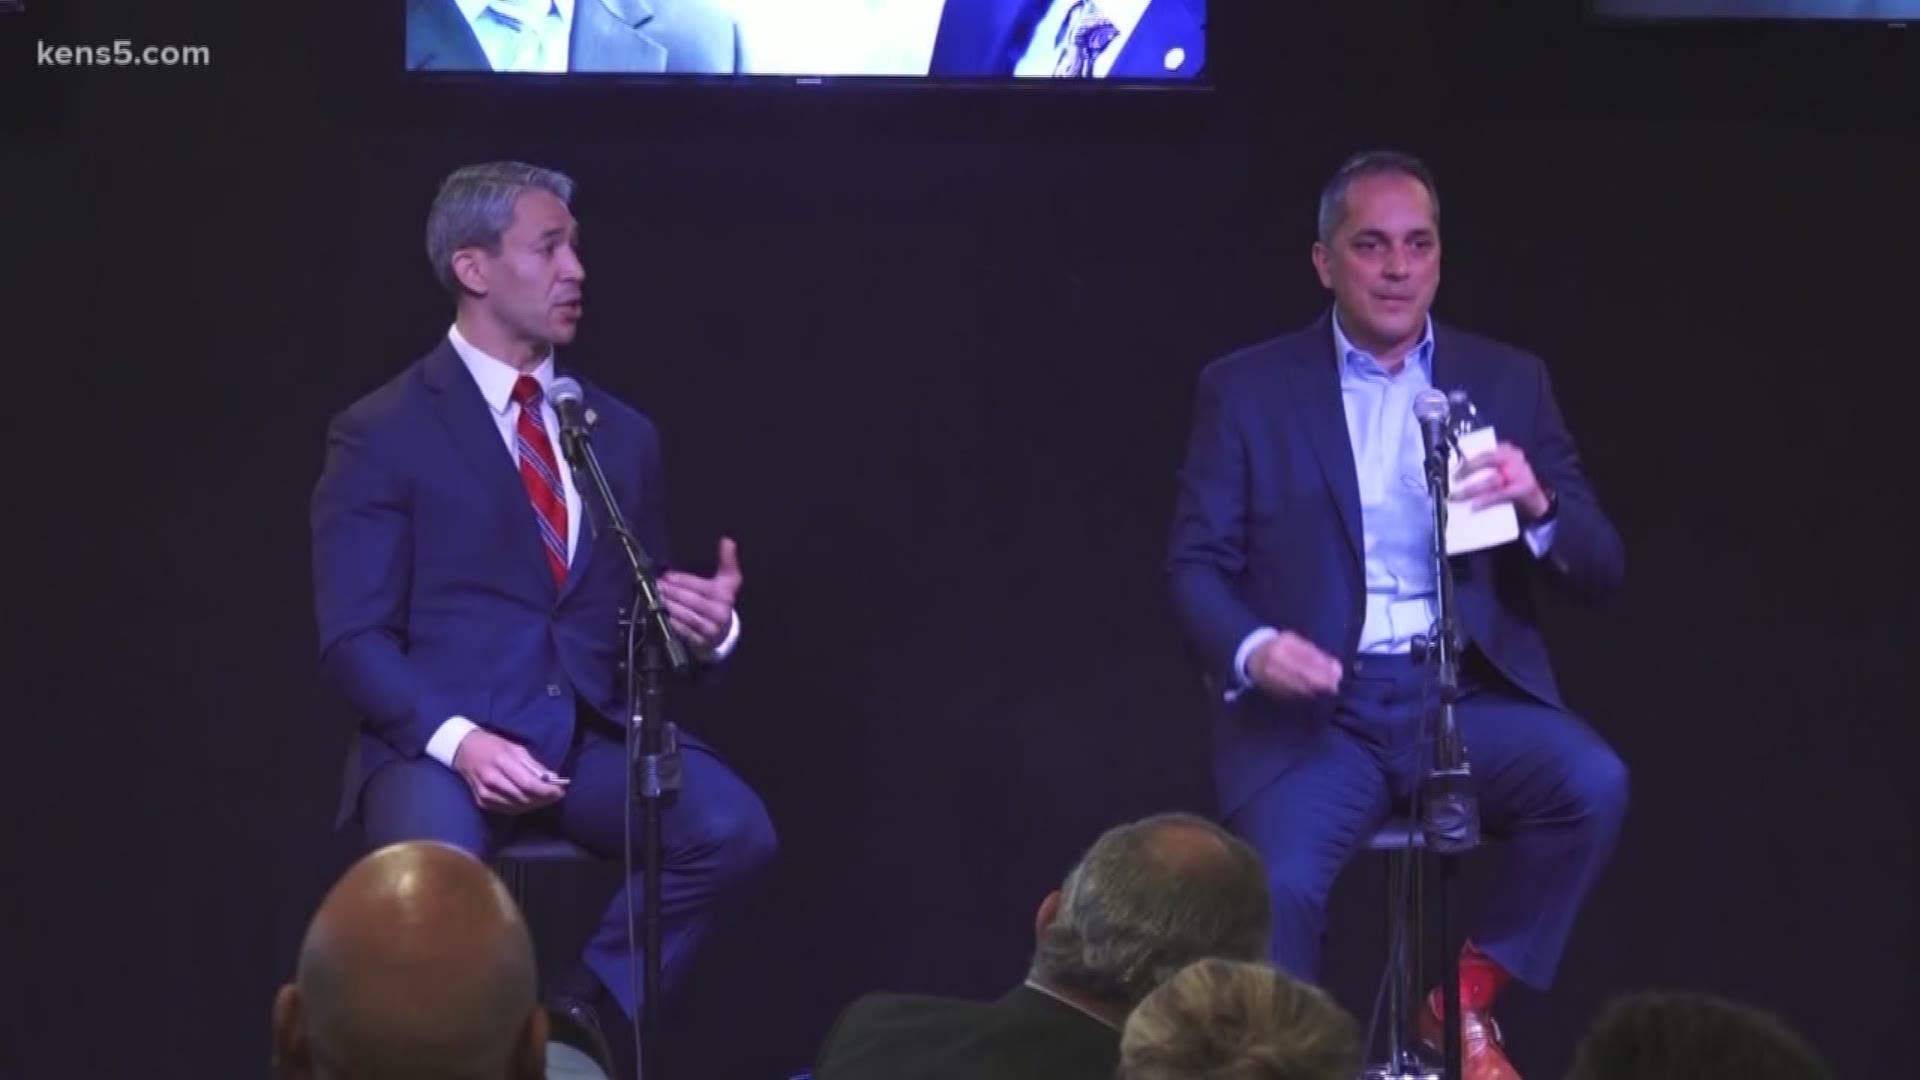 Mayor Ron Nirenberg and Councilman Greg Brockhouse discuss a wide range of topics in their first Mayoral debate.